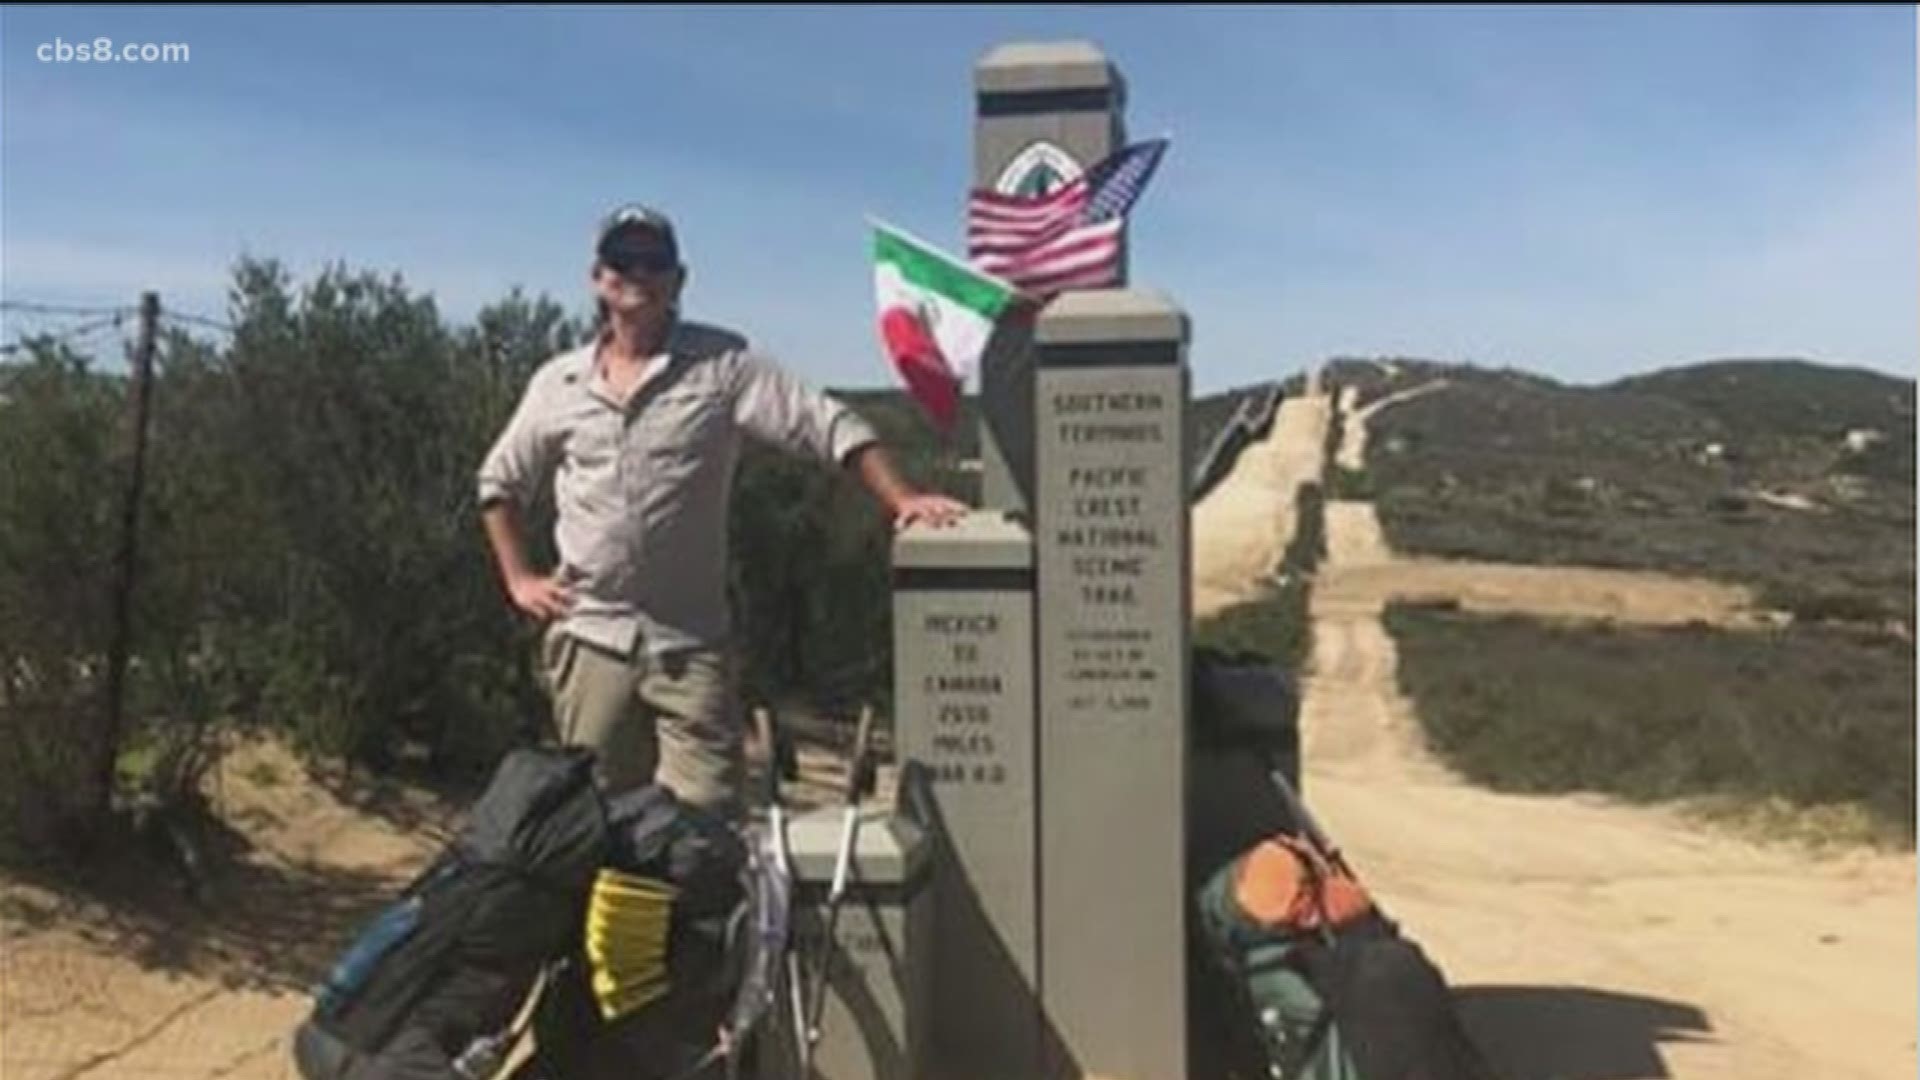 A San Diego man is on a mission to conquer one of the trials in the "triple crown of hiking."